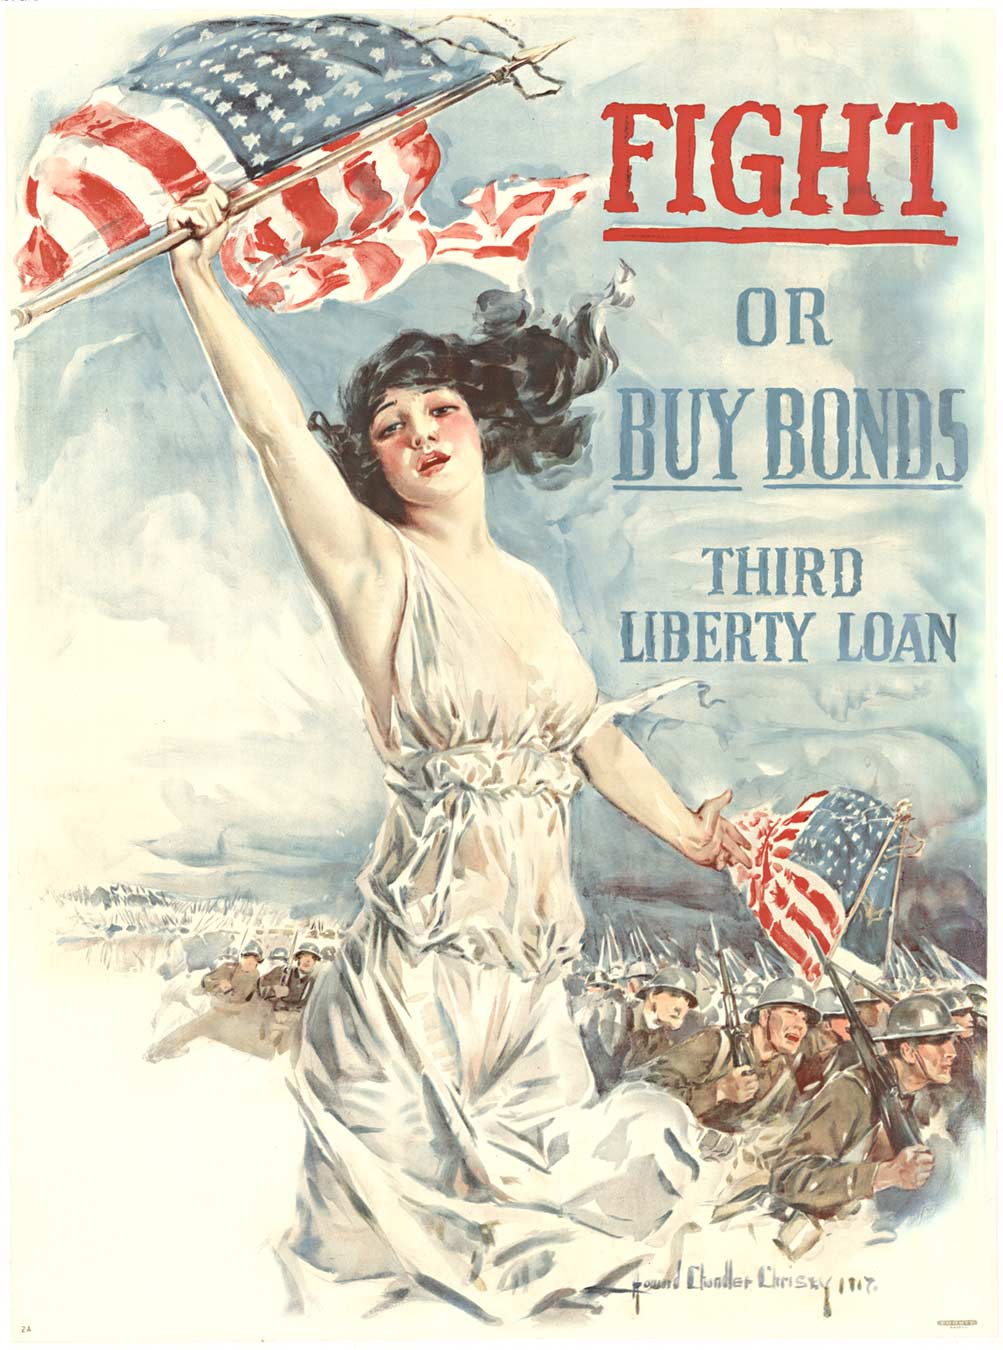 Original. Linen backed. Lithograpgh. FIGHT OR BUY BONDS. THIRD LIBERTY LOAN. <br>ARTIST: Howard Chandler Christy. <br>Linen backed, larger size format for this poster. <br> <br>One of the most famous and powerful WW1 propaganda images, this fla